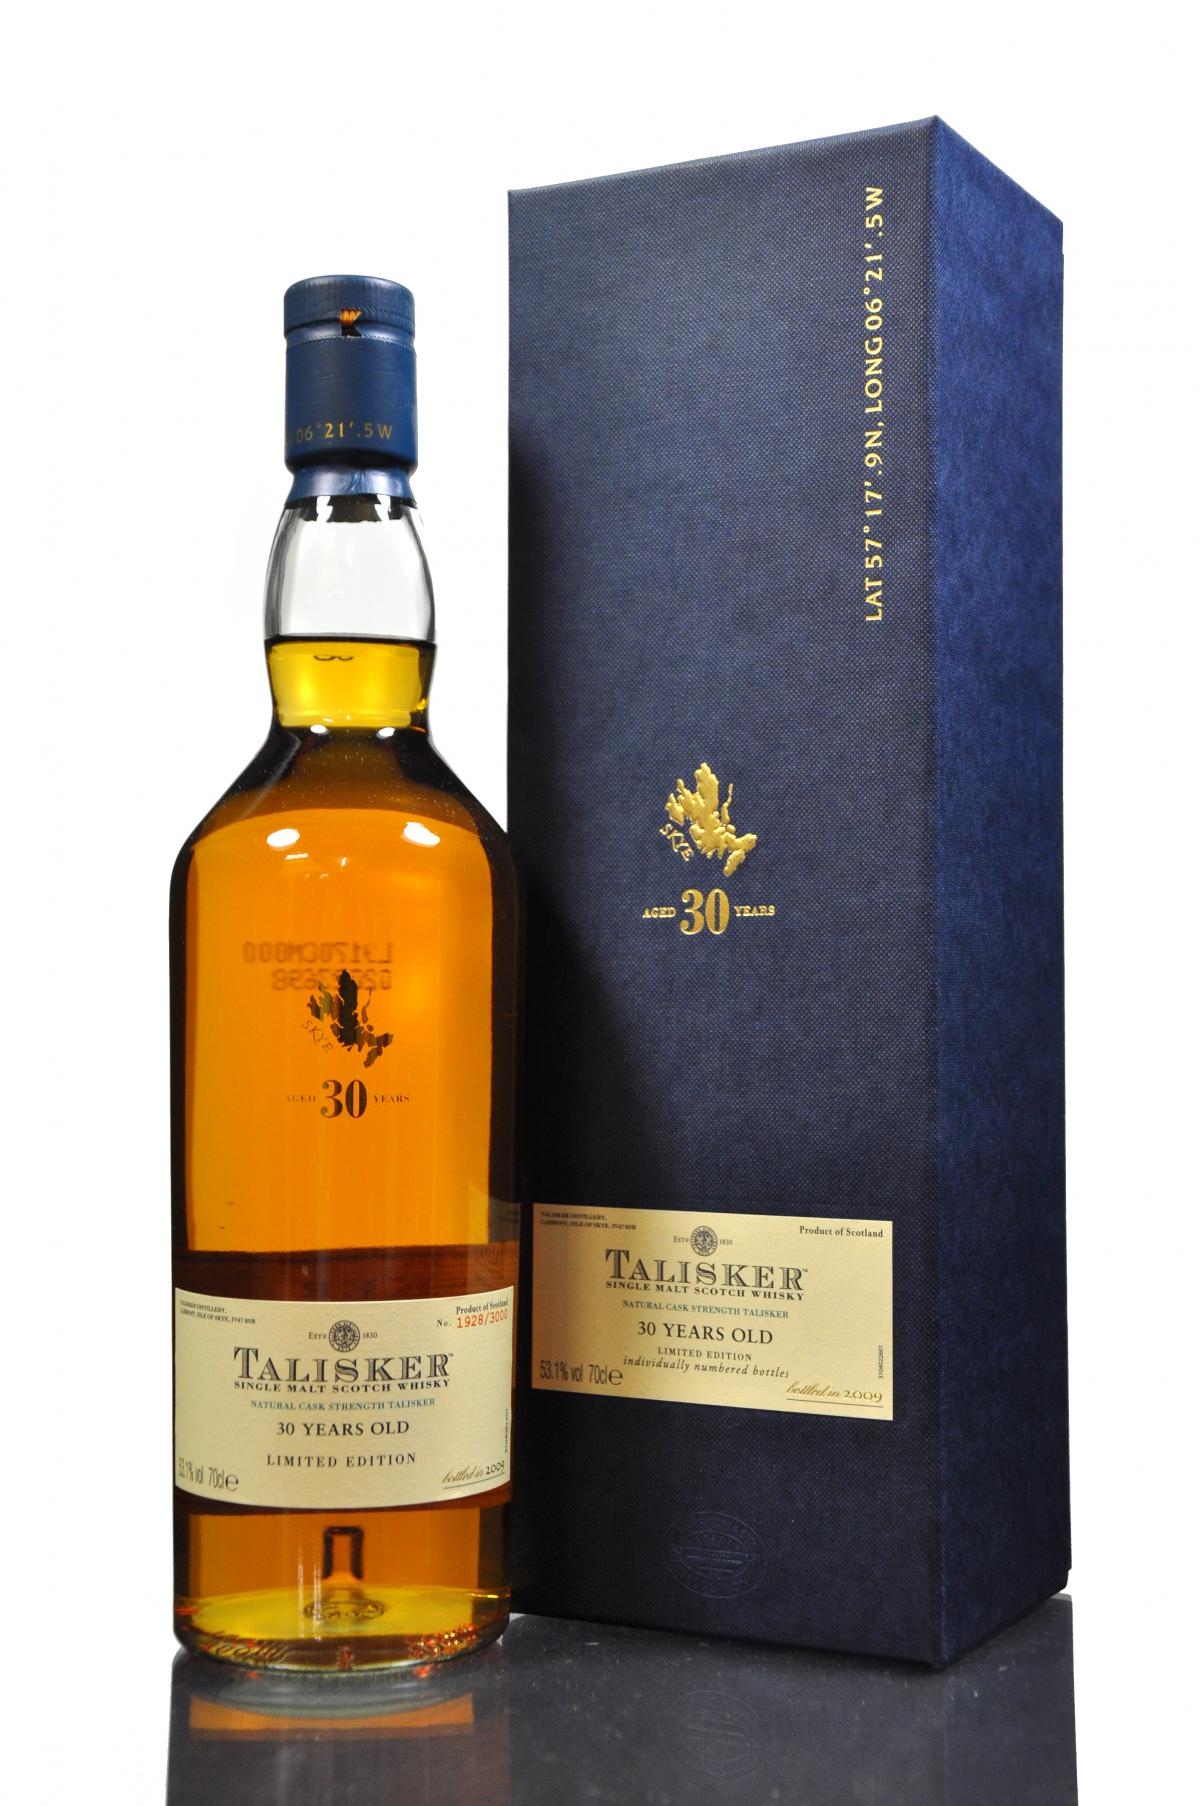 Talisker 30 Year Old - 2009 Edition